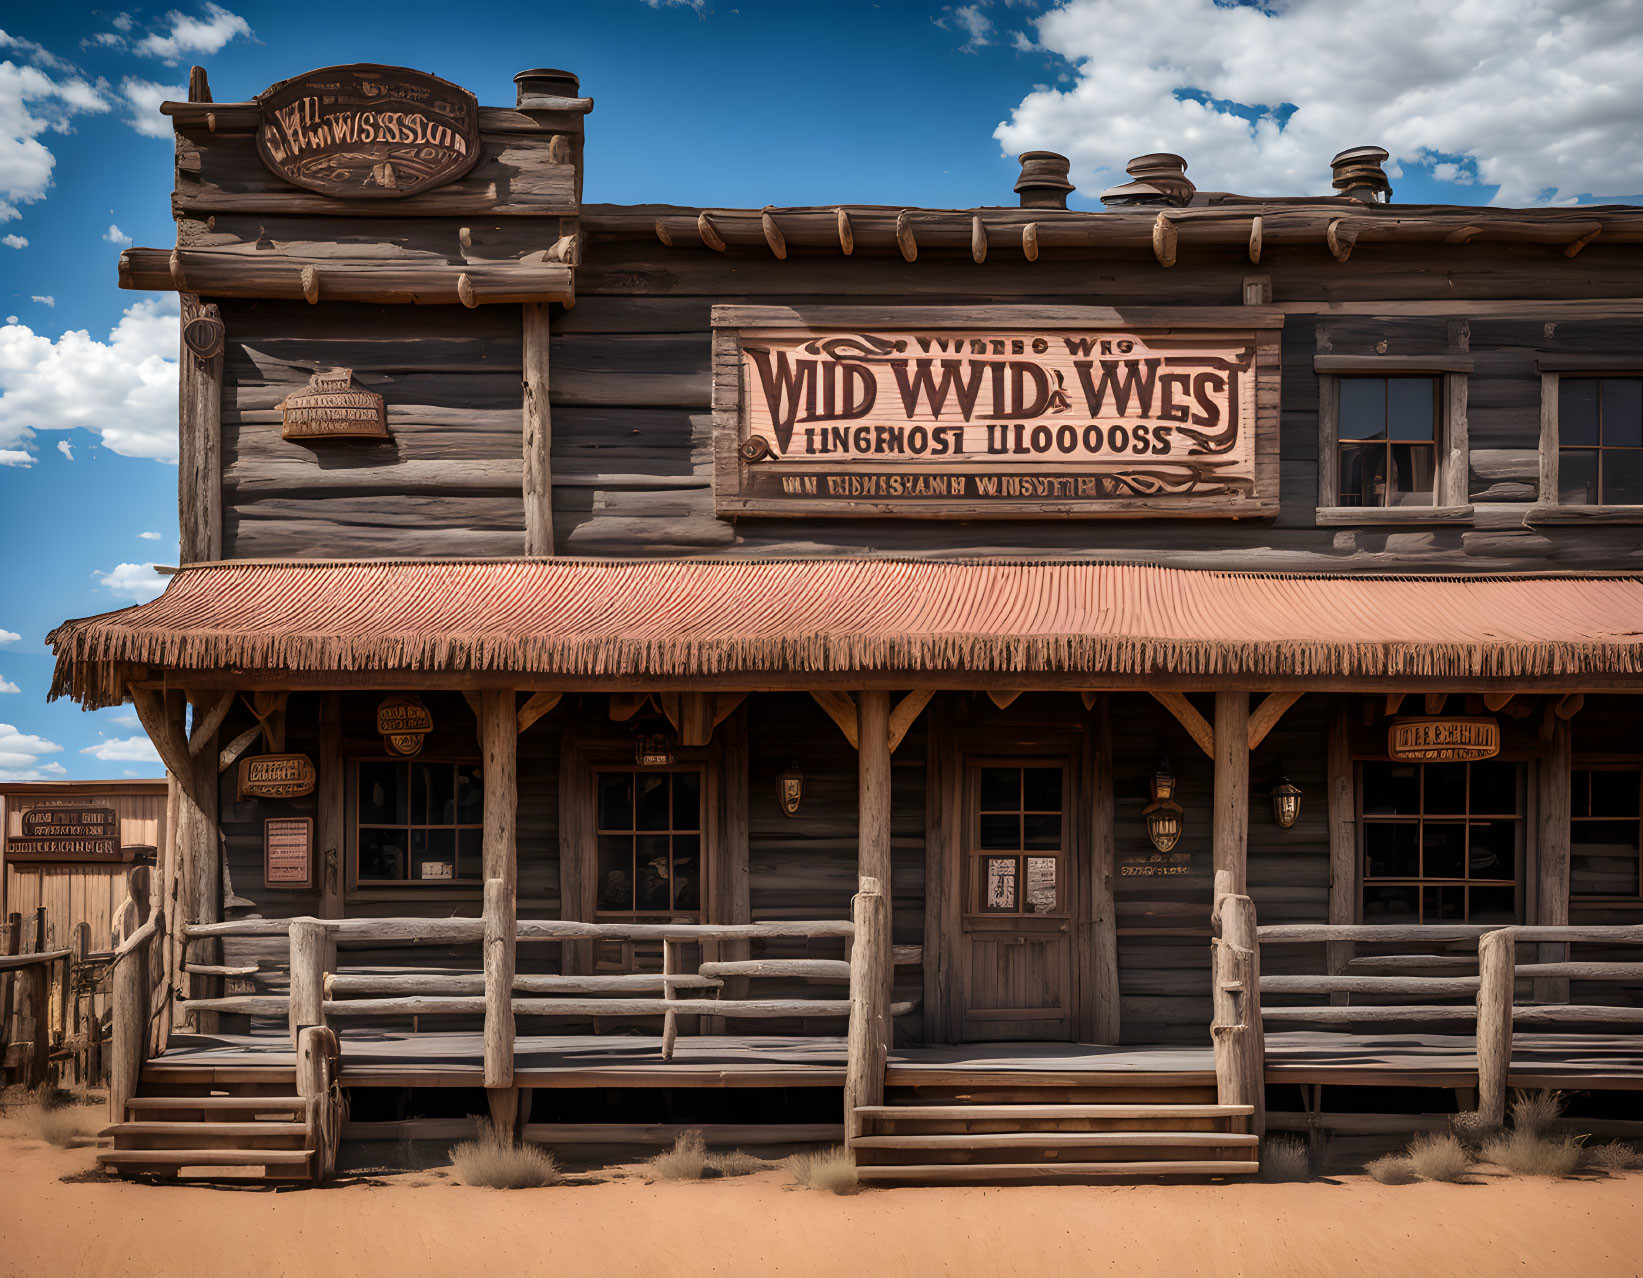 Wild West-themed building with rustic wooden facade and bold signage under clear blue sky